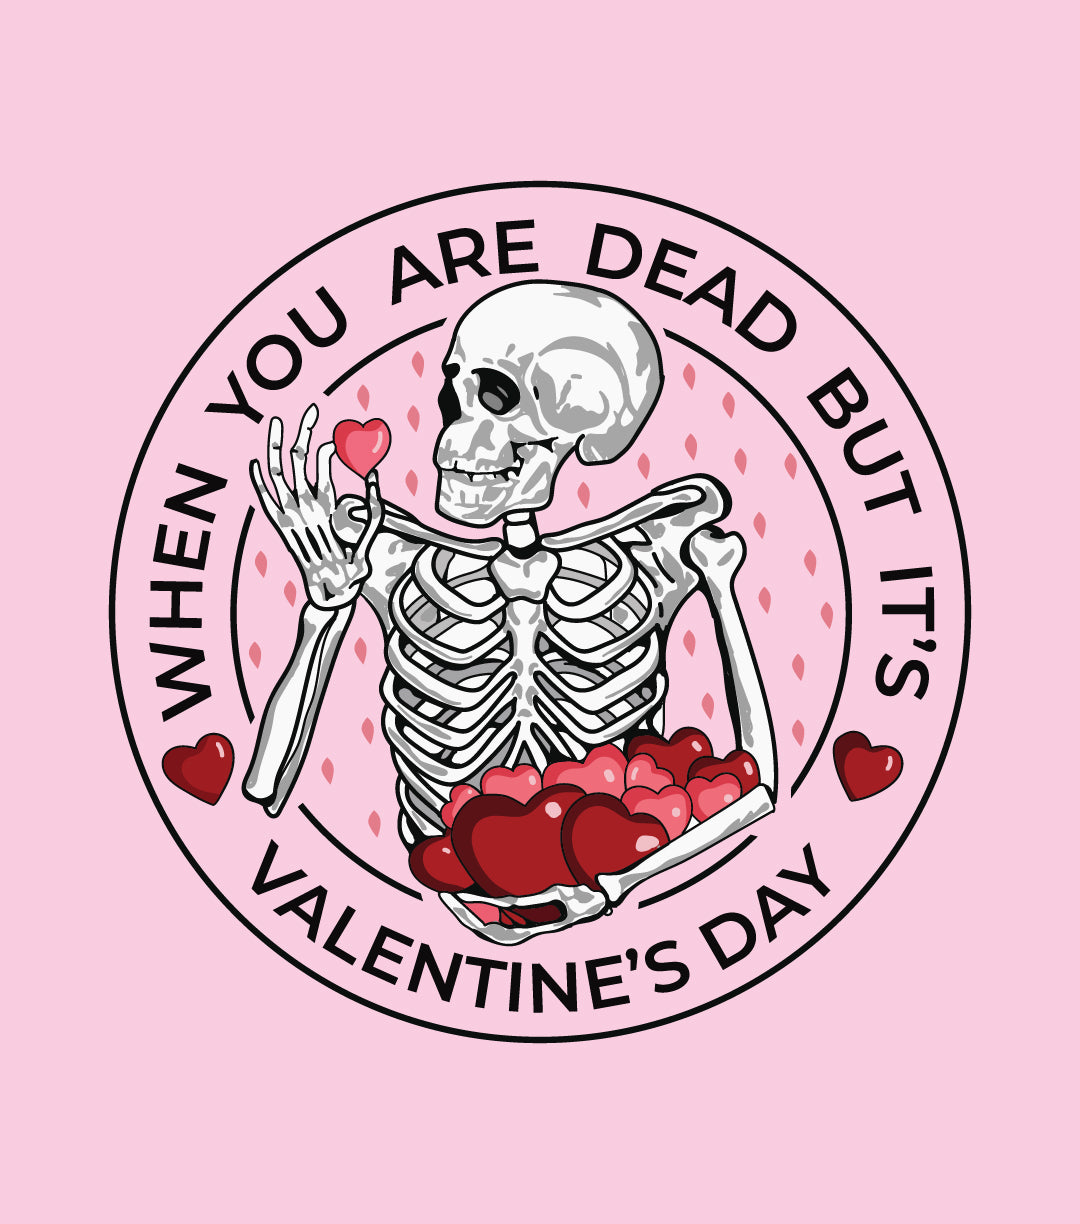 When You Are Dead Inside But It's Valentine's Day